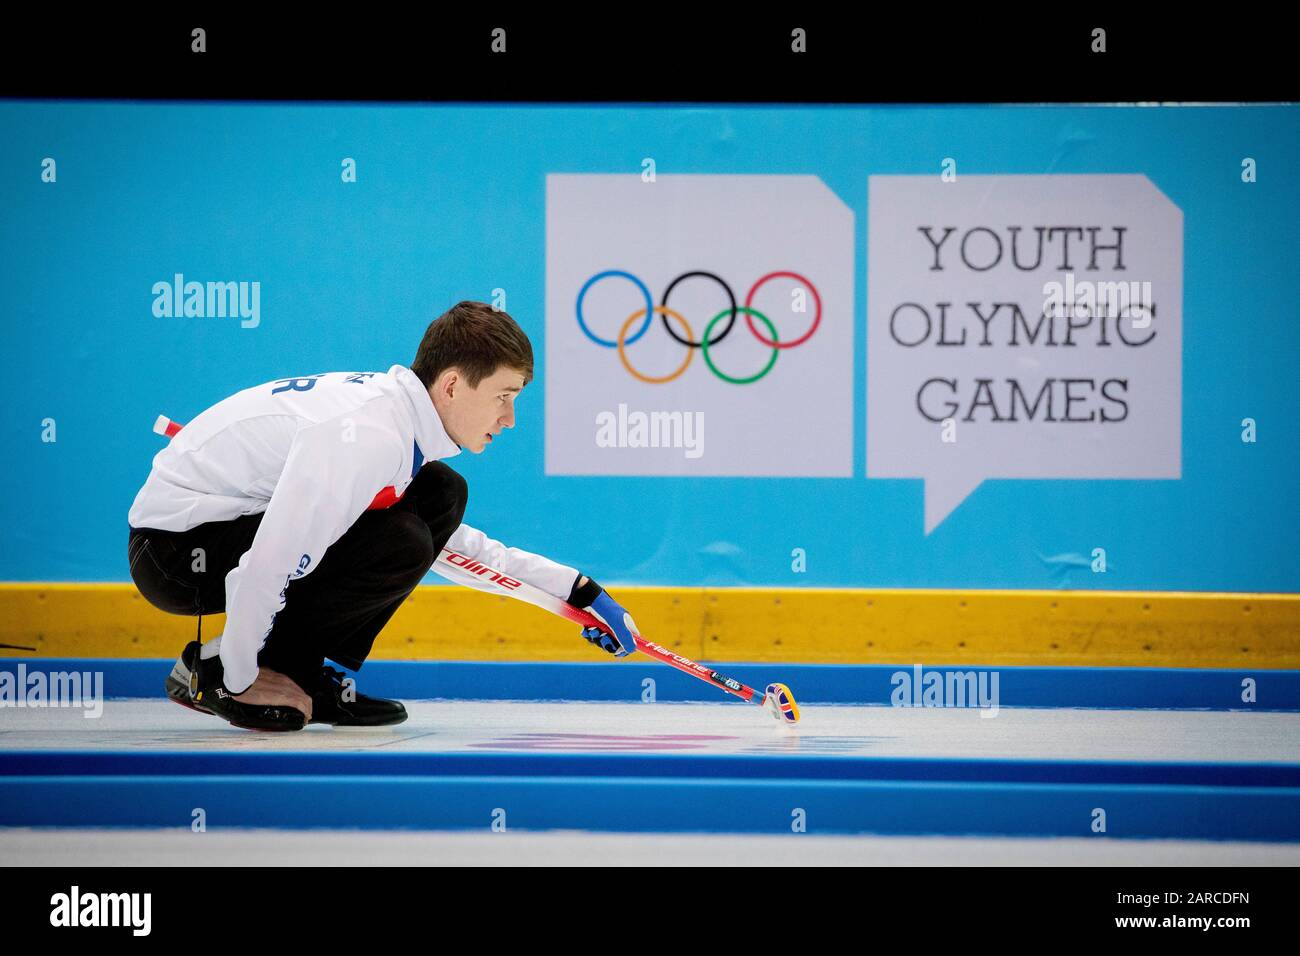 Team GB’s Ross Craik (15) in the curling mixed doubles with teammate Natalie Wiksten (DEN) during the Lausanne 2020 Youth Olympic Games Stock Photo